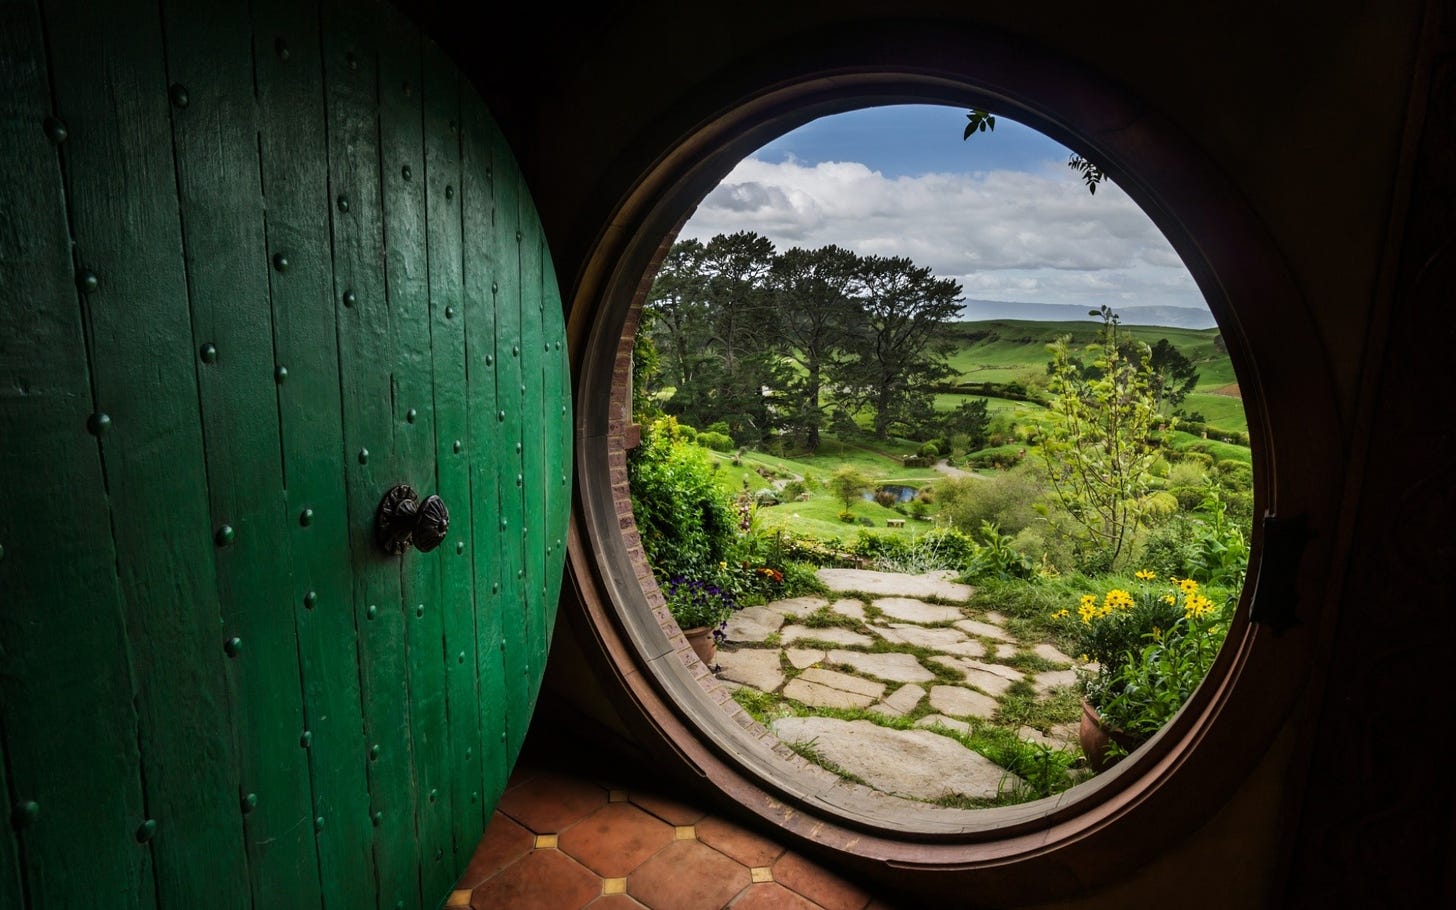 4570697 The Hobbit, nature, The Lord of the Rings, The Shire, door, Bag End 